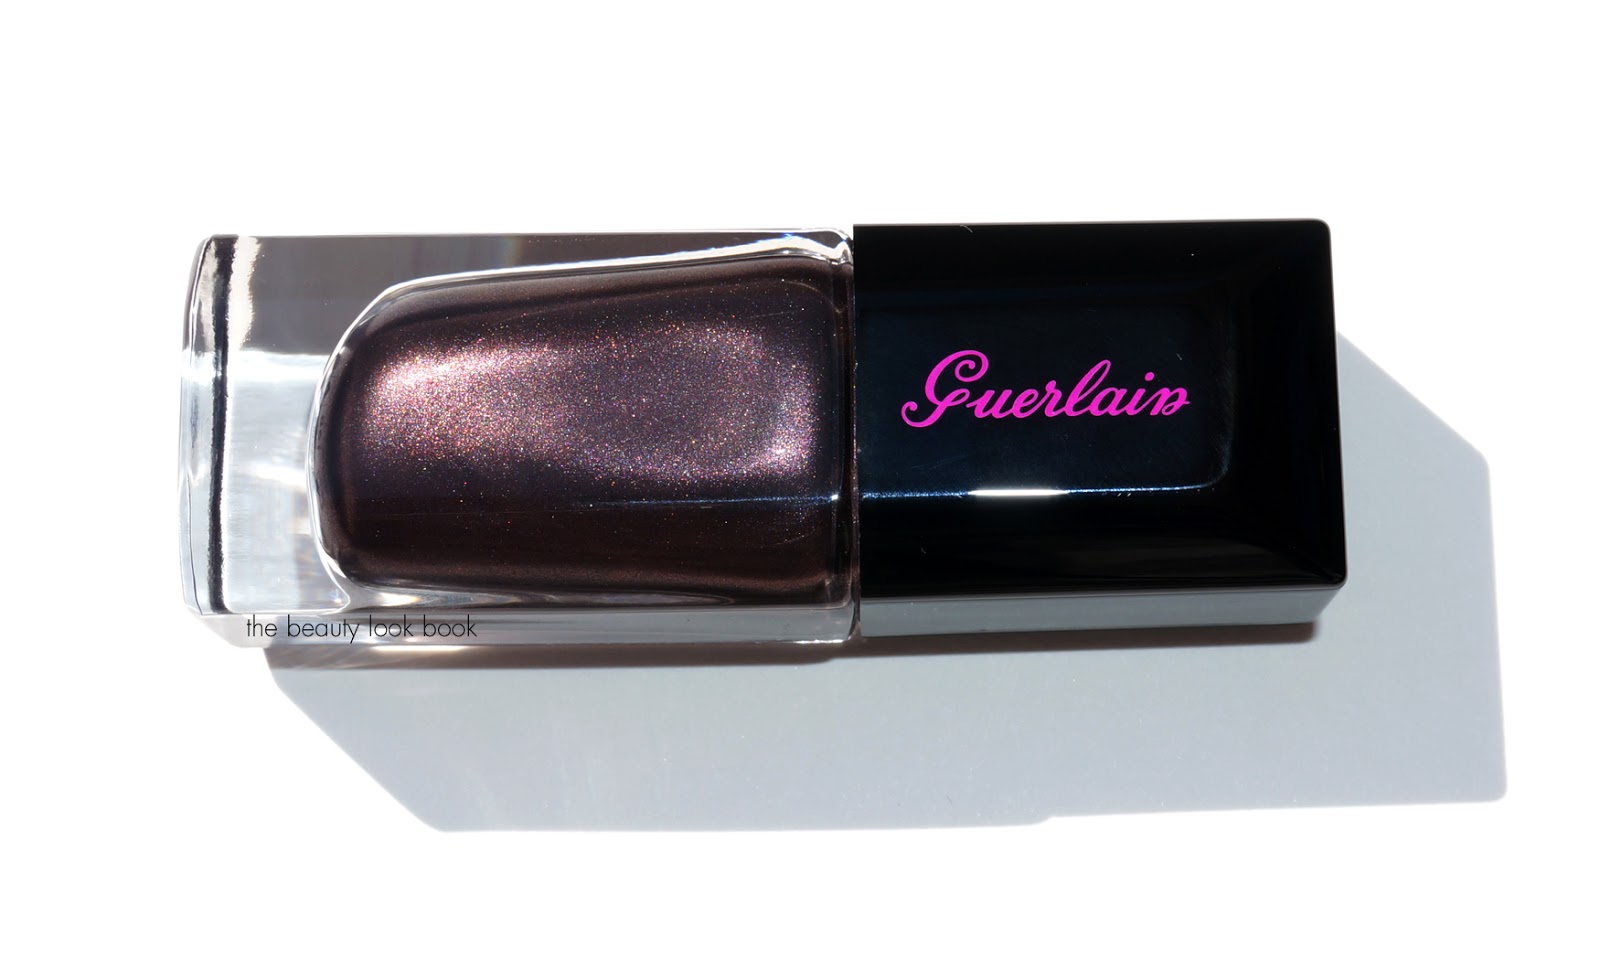 The Beauty Look Book: Guerlain Sulfurous #861 Nail Lacquer ...